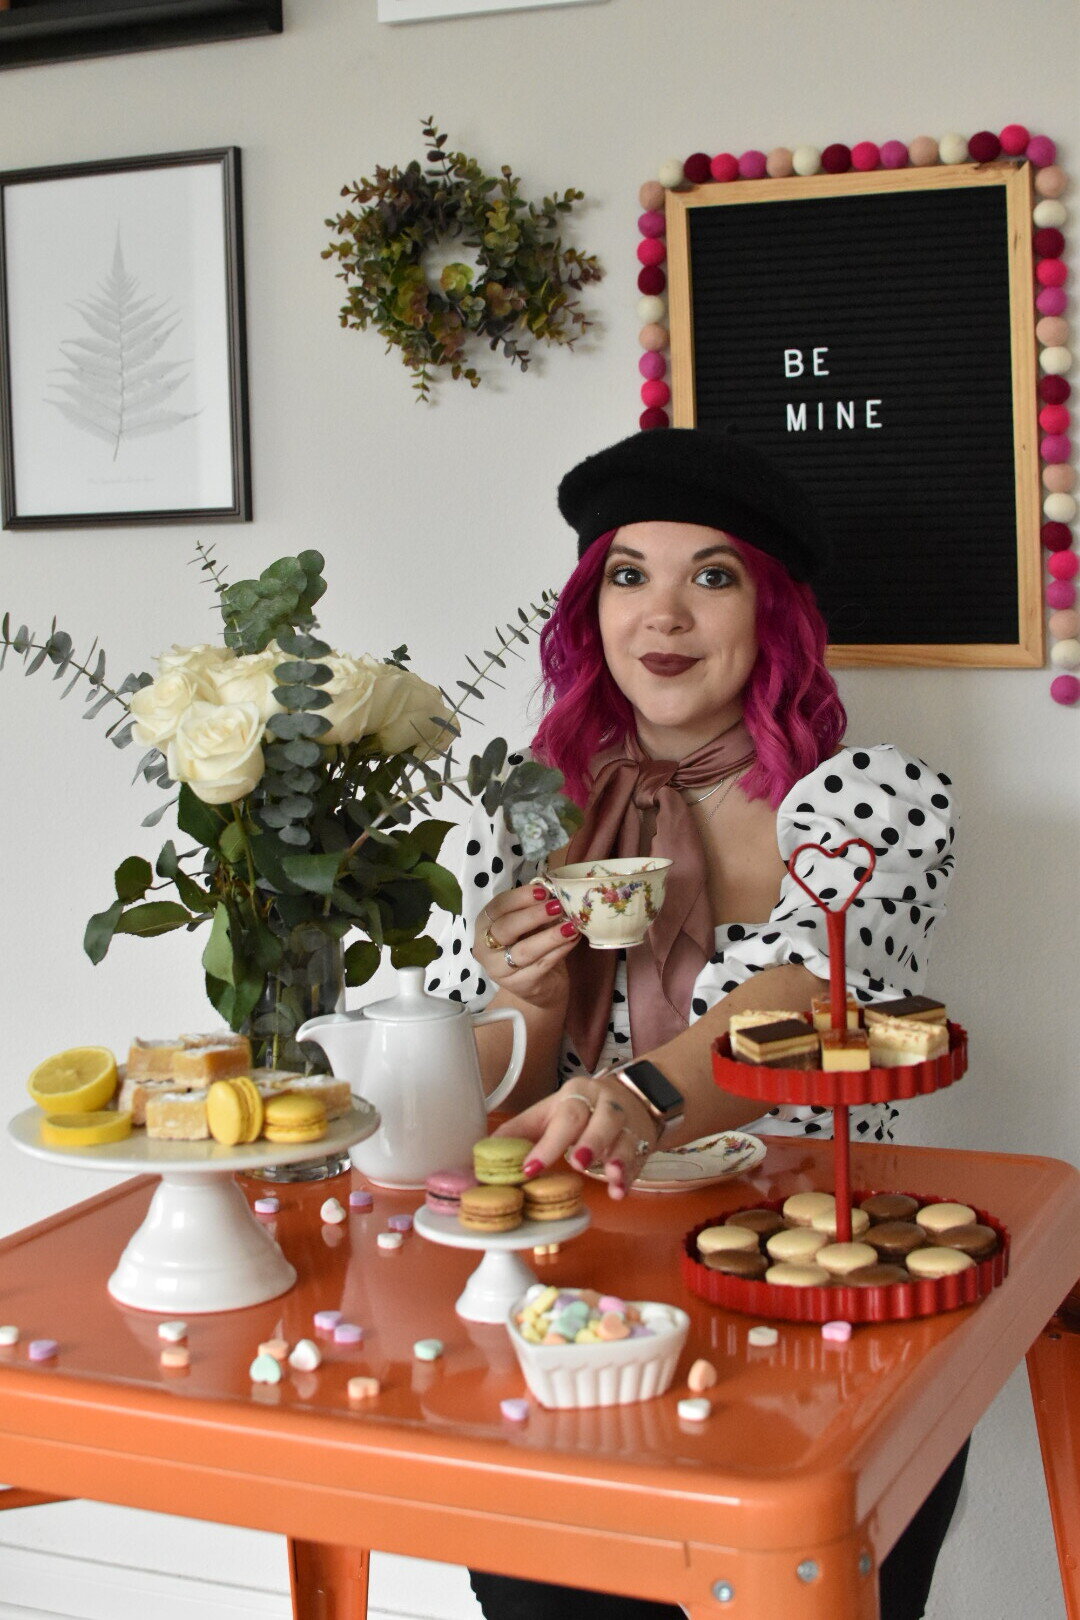 HOW TO THROW A VALENTINE'S DAY THEMED TEA PARTY UNDER $50